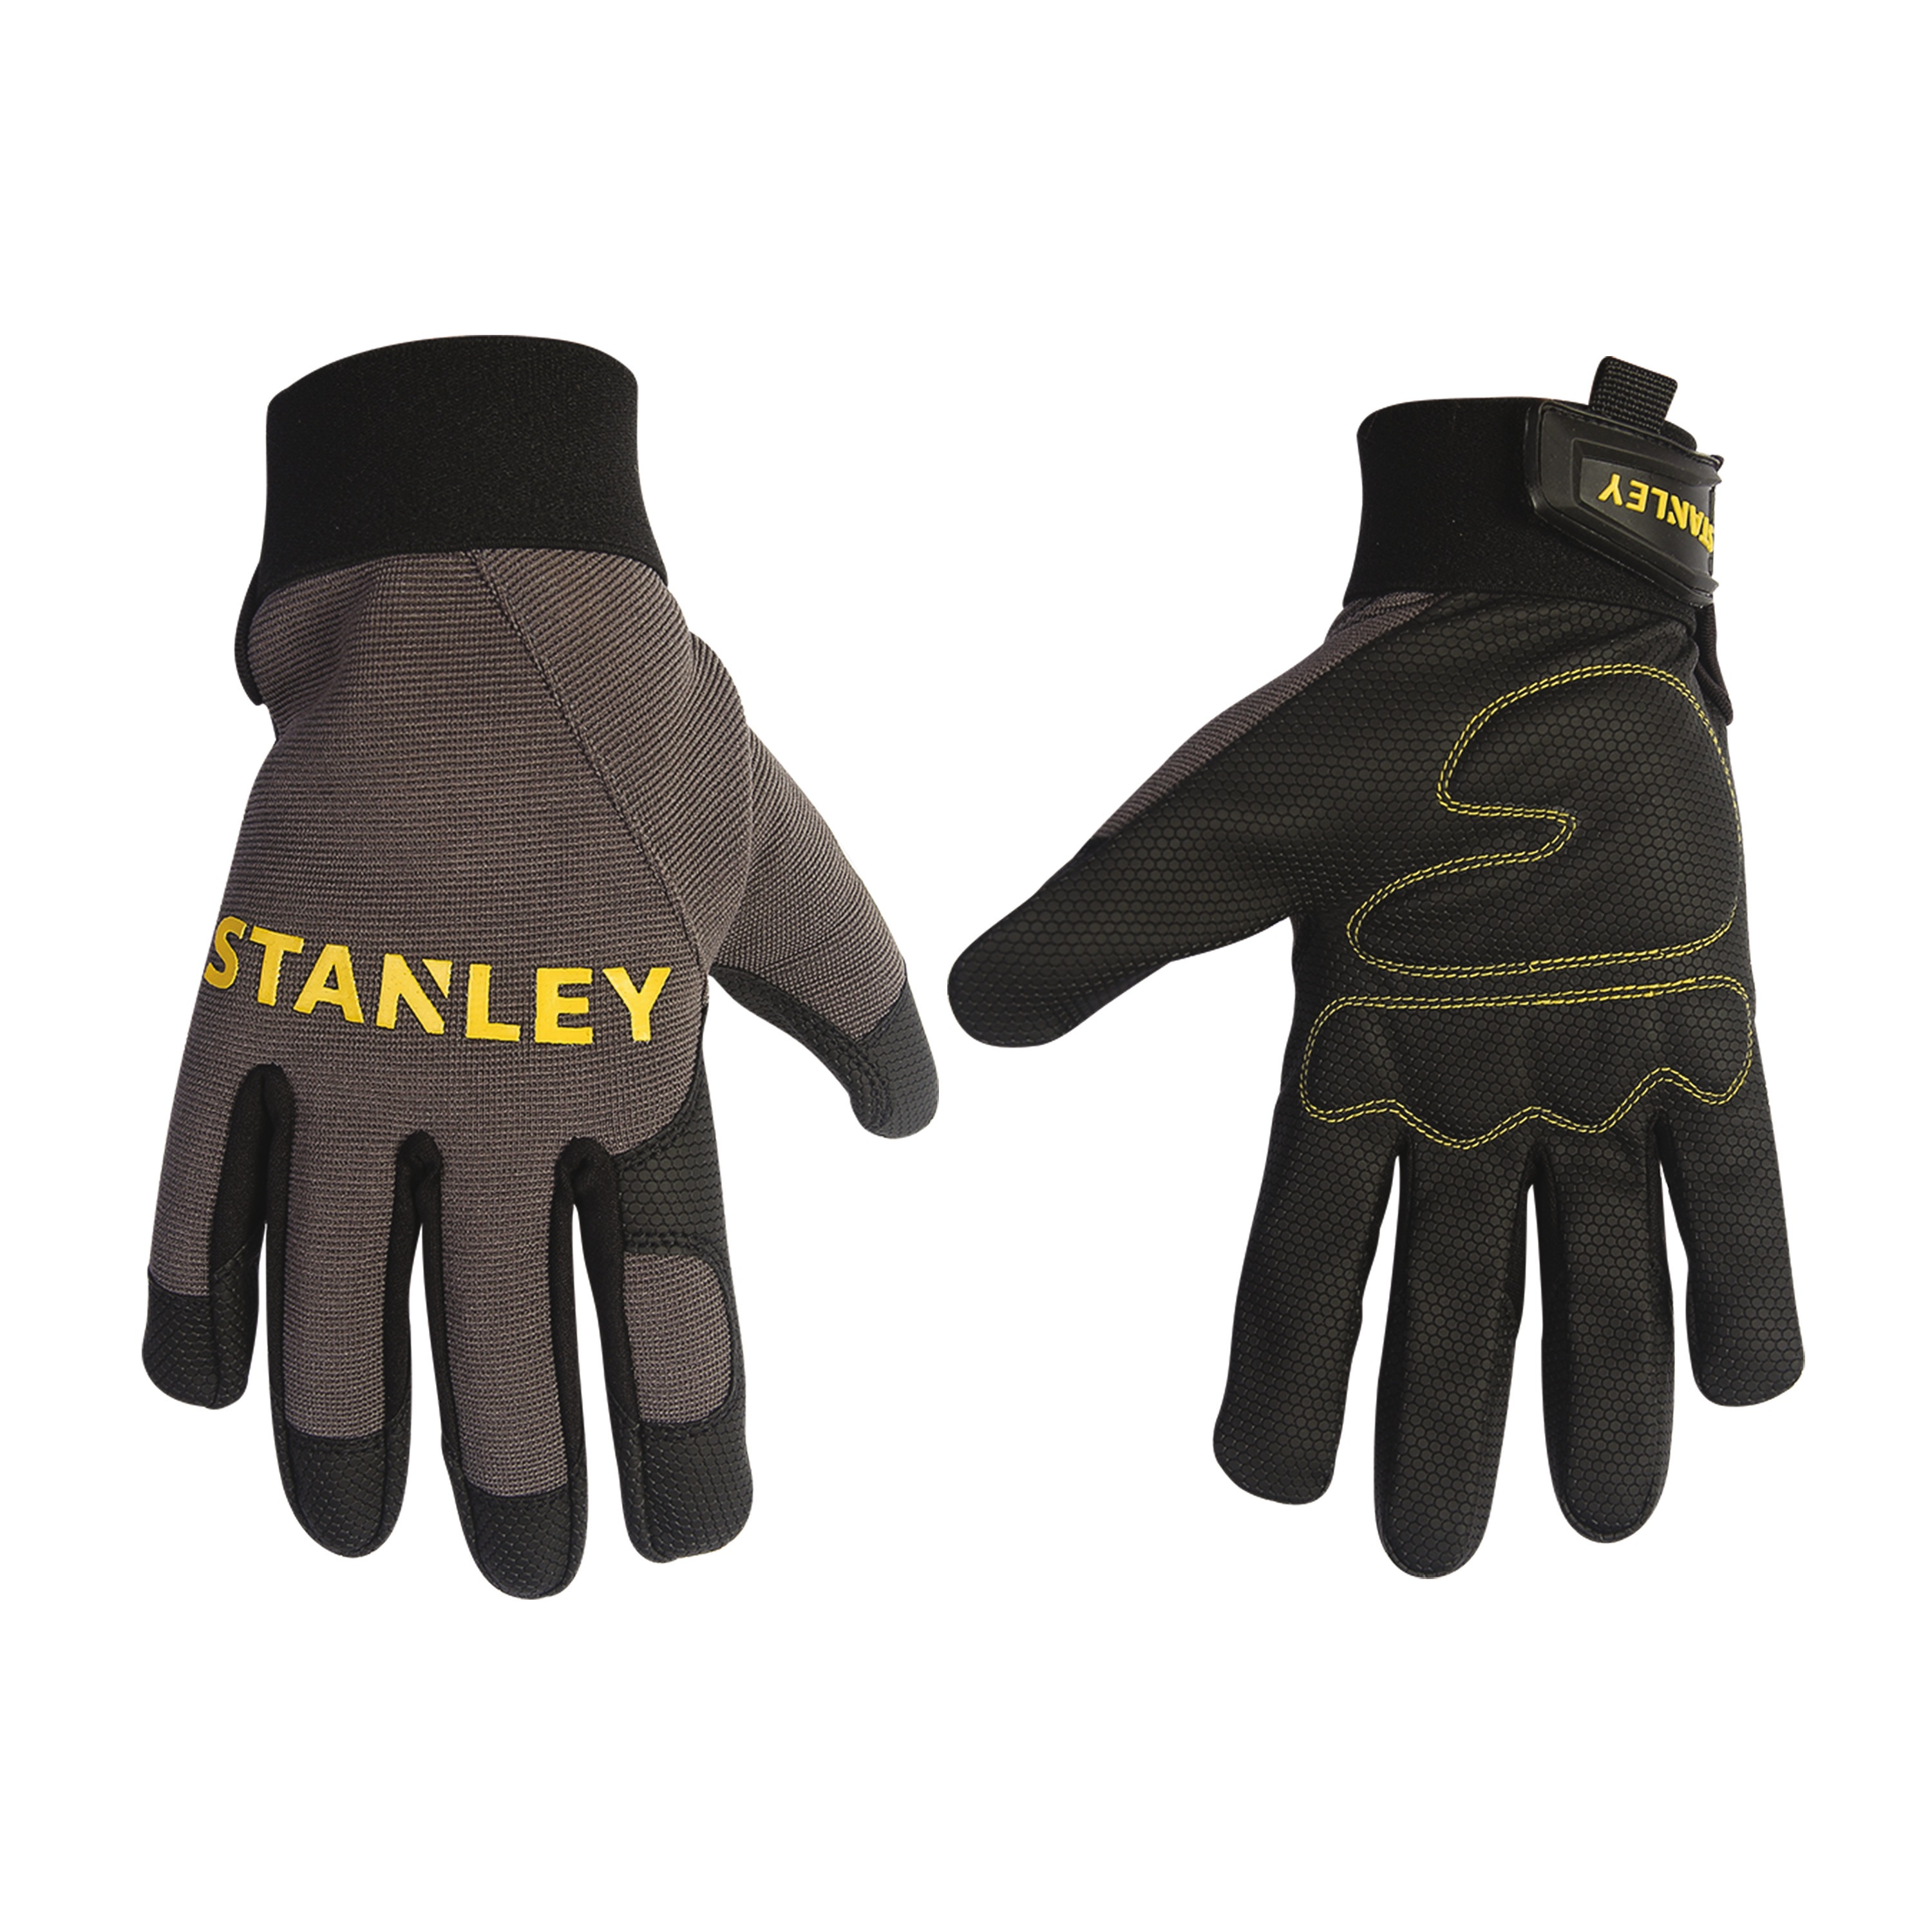 Stanley Tools - Padded Comfort Grip Digital Polyurethane Palm with Foam Padding - S77641